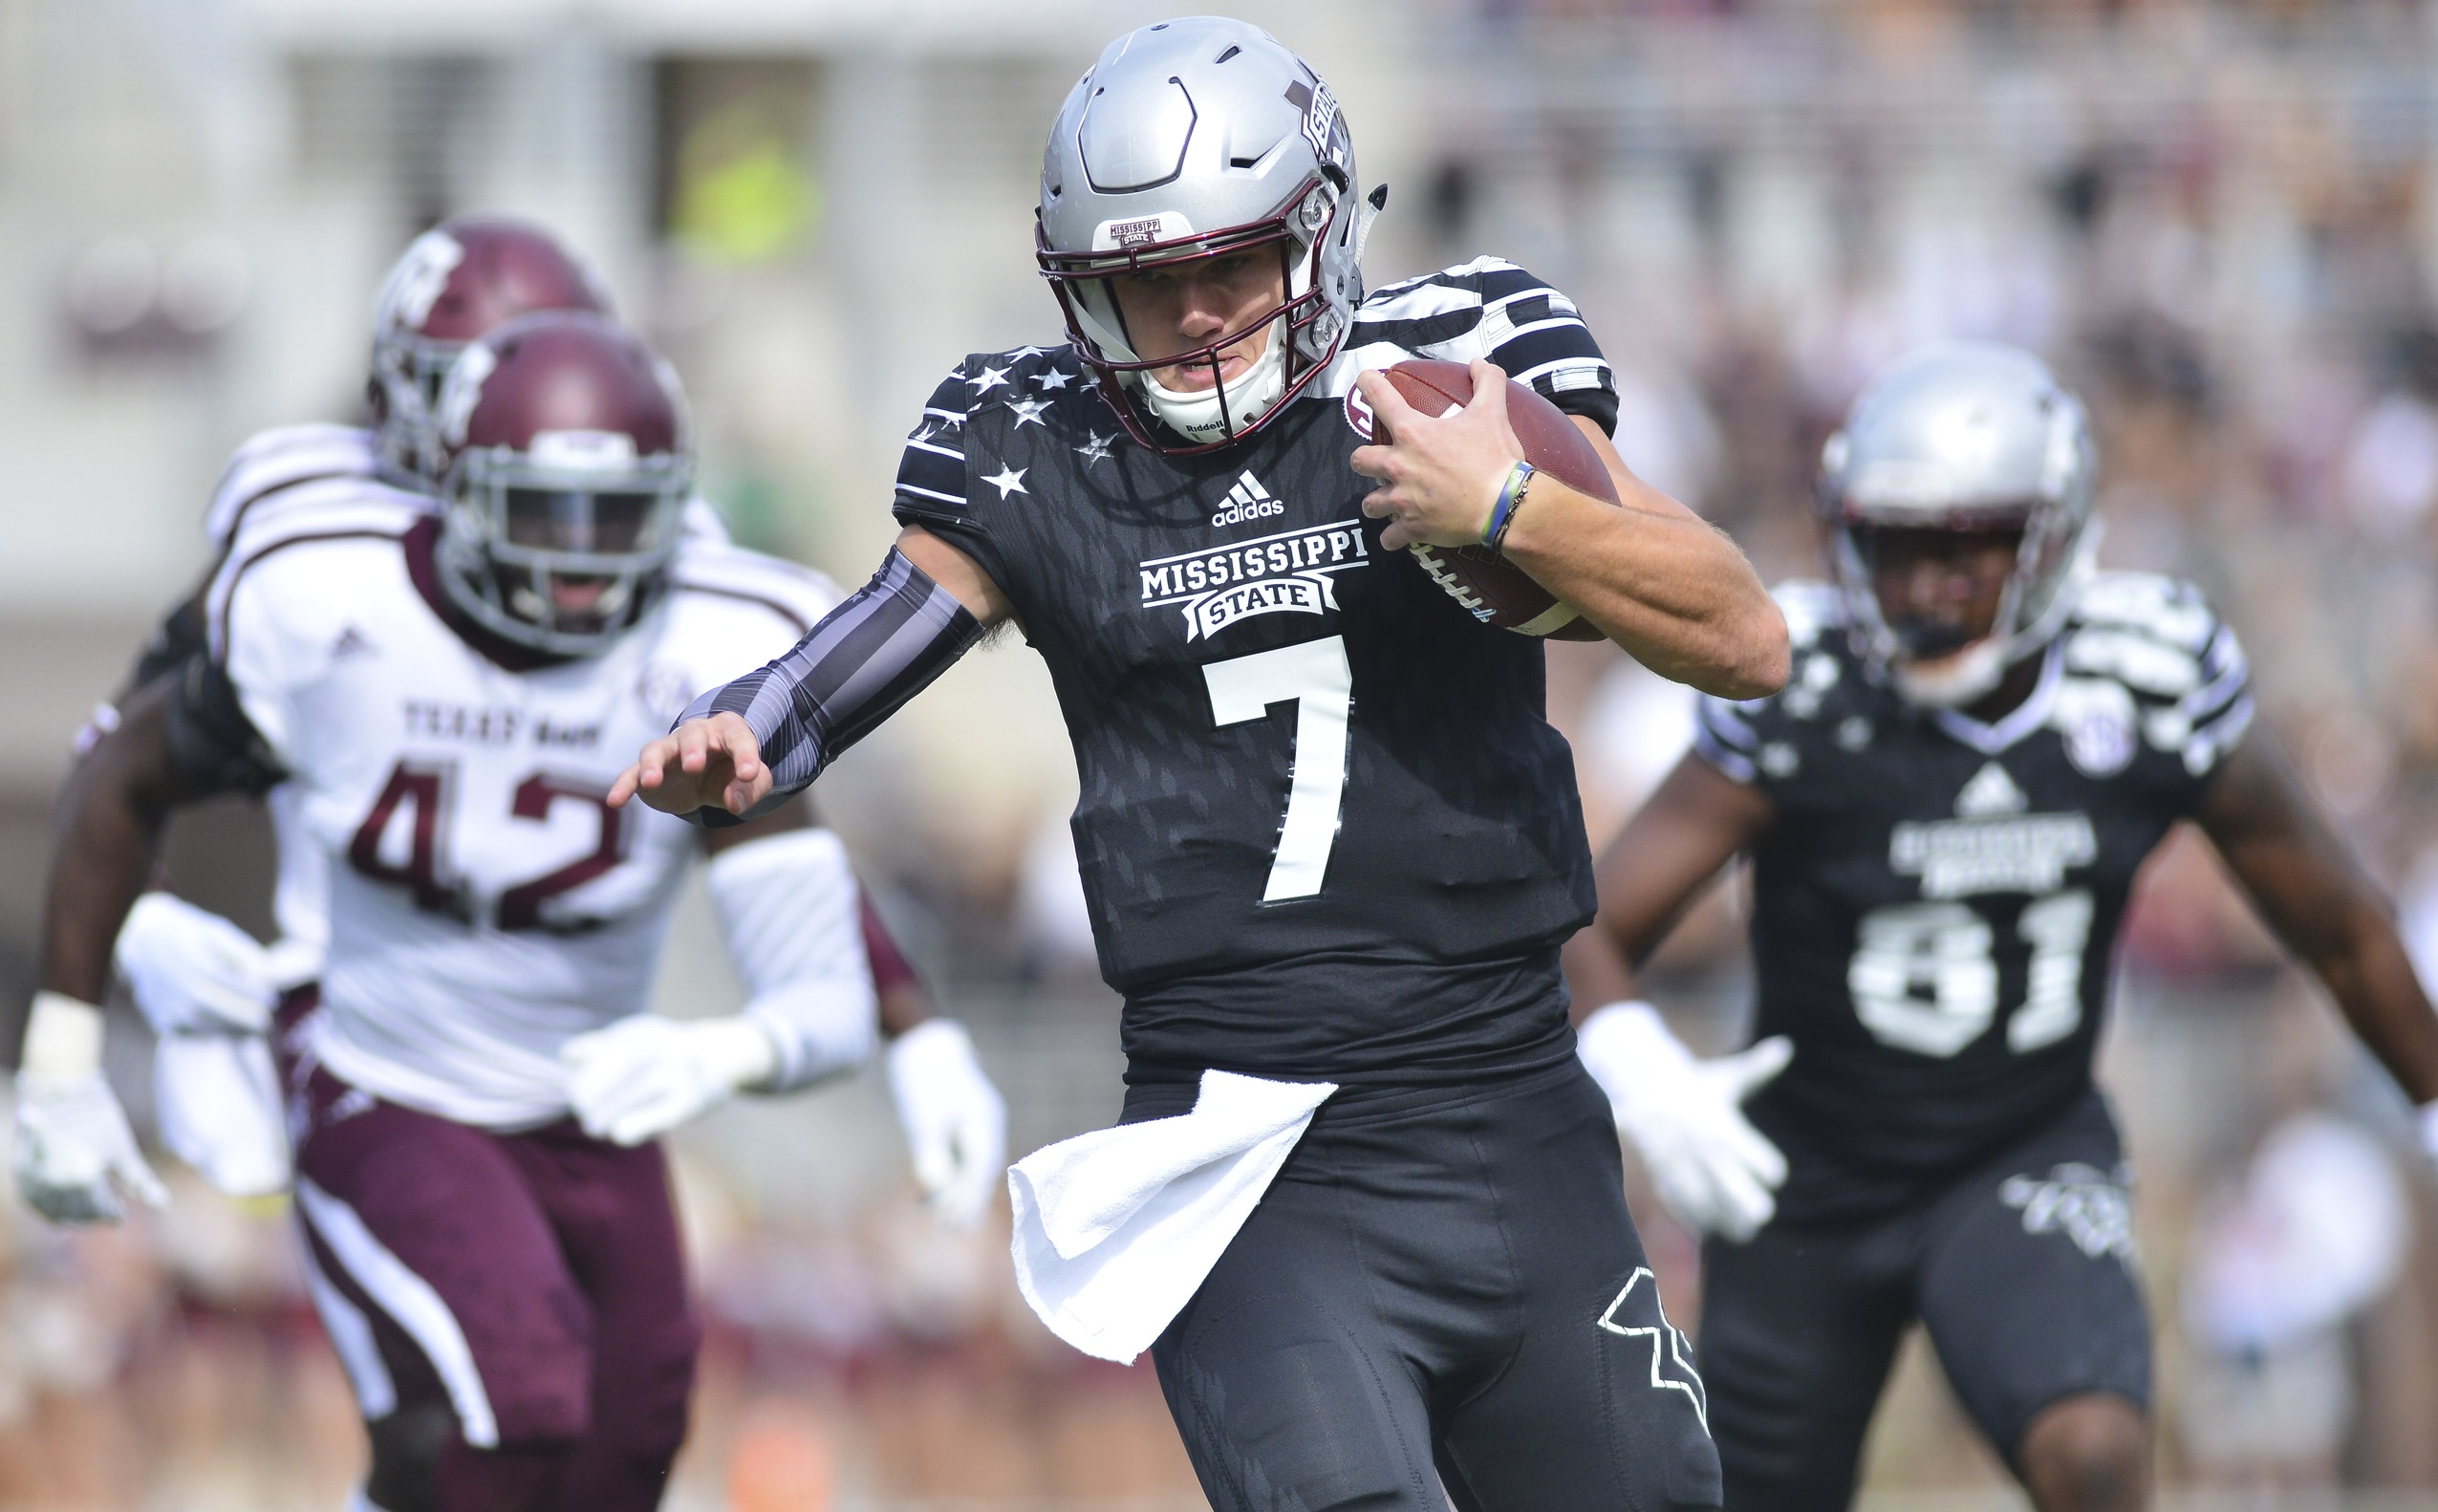 Nov 5, 2016; Starkville, MS, USA;Mississippi State Bulldogs quarterback Nick Fitzgerald (7) carries the ball during the first quarter against the Texas A&M Aggies at Davis Wade Stadium. Mandatory Credit: Matt Bush-USA TODAY Sports